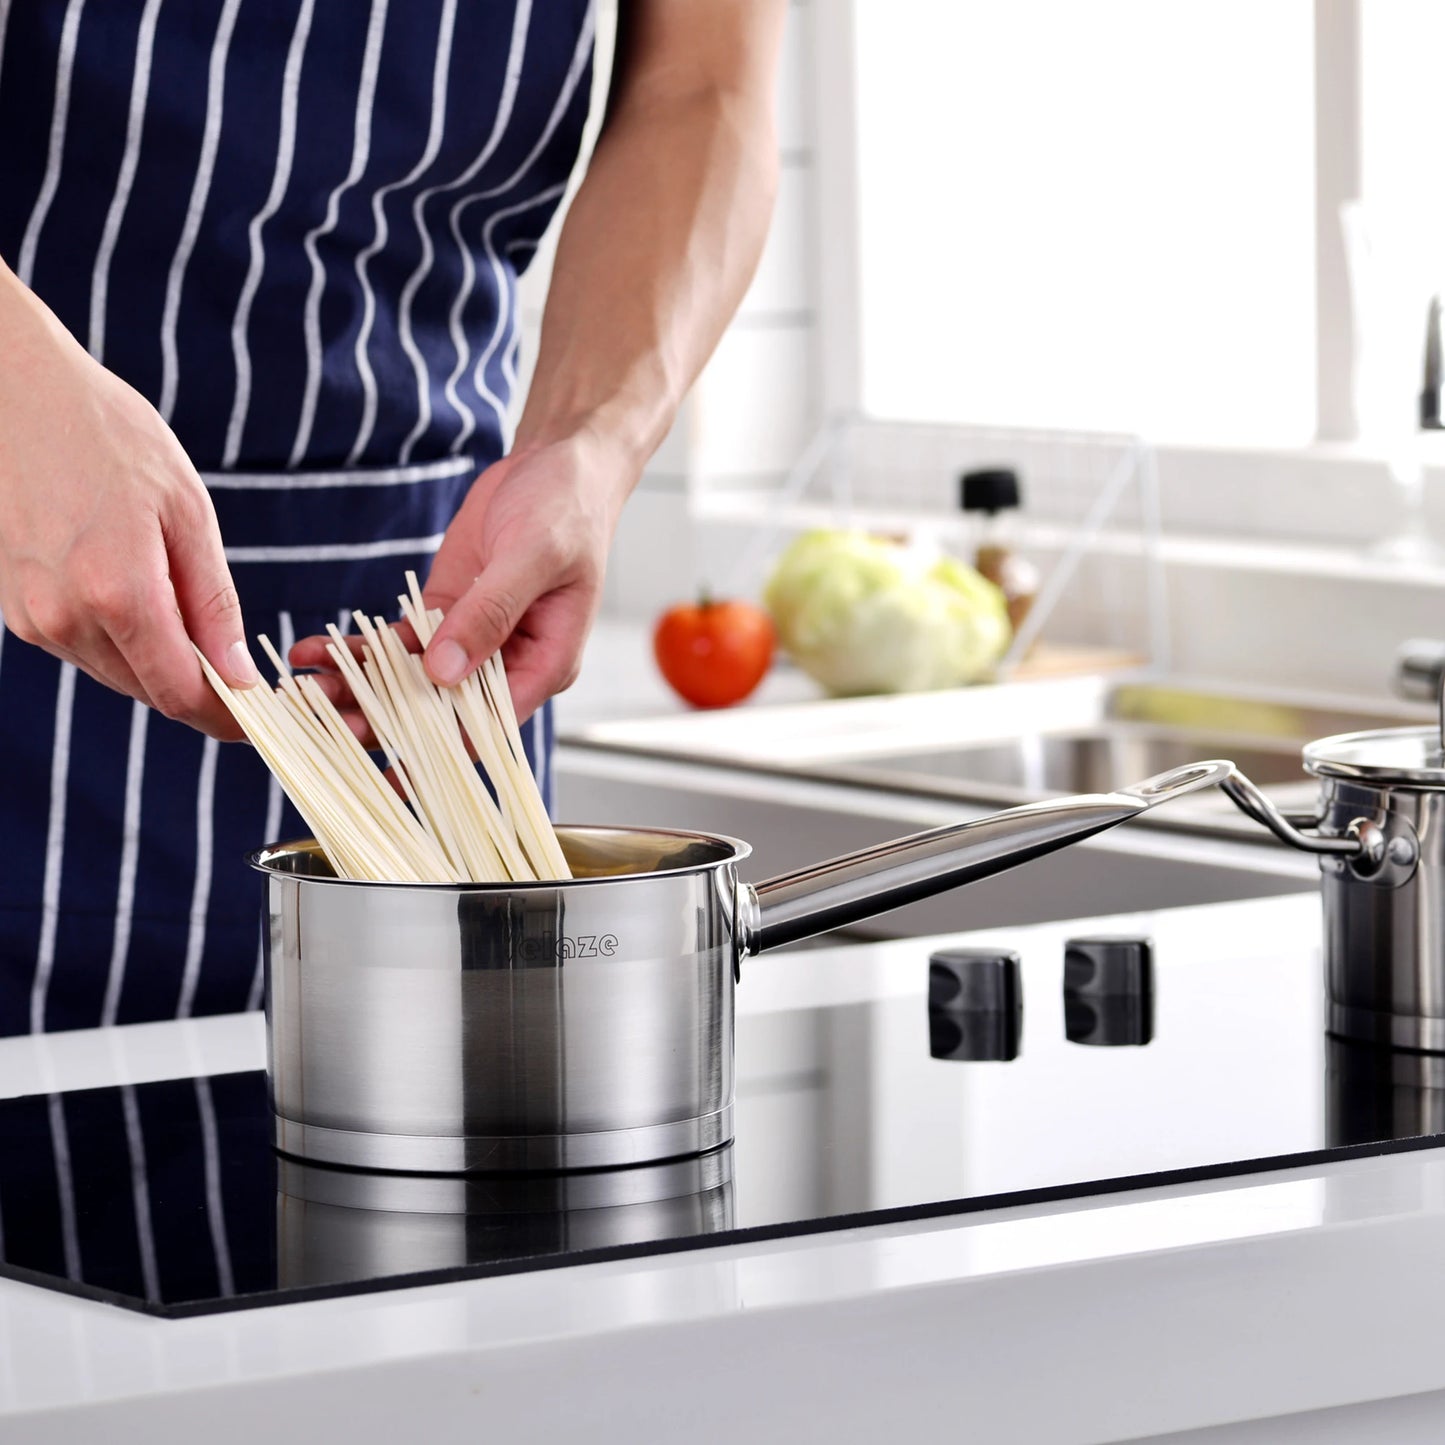 Velaze Stainless Steel Cookware Set - Induction Ready